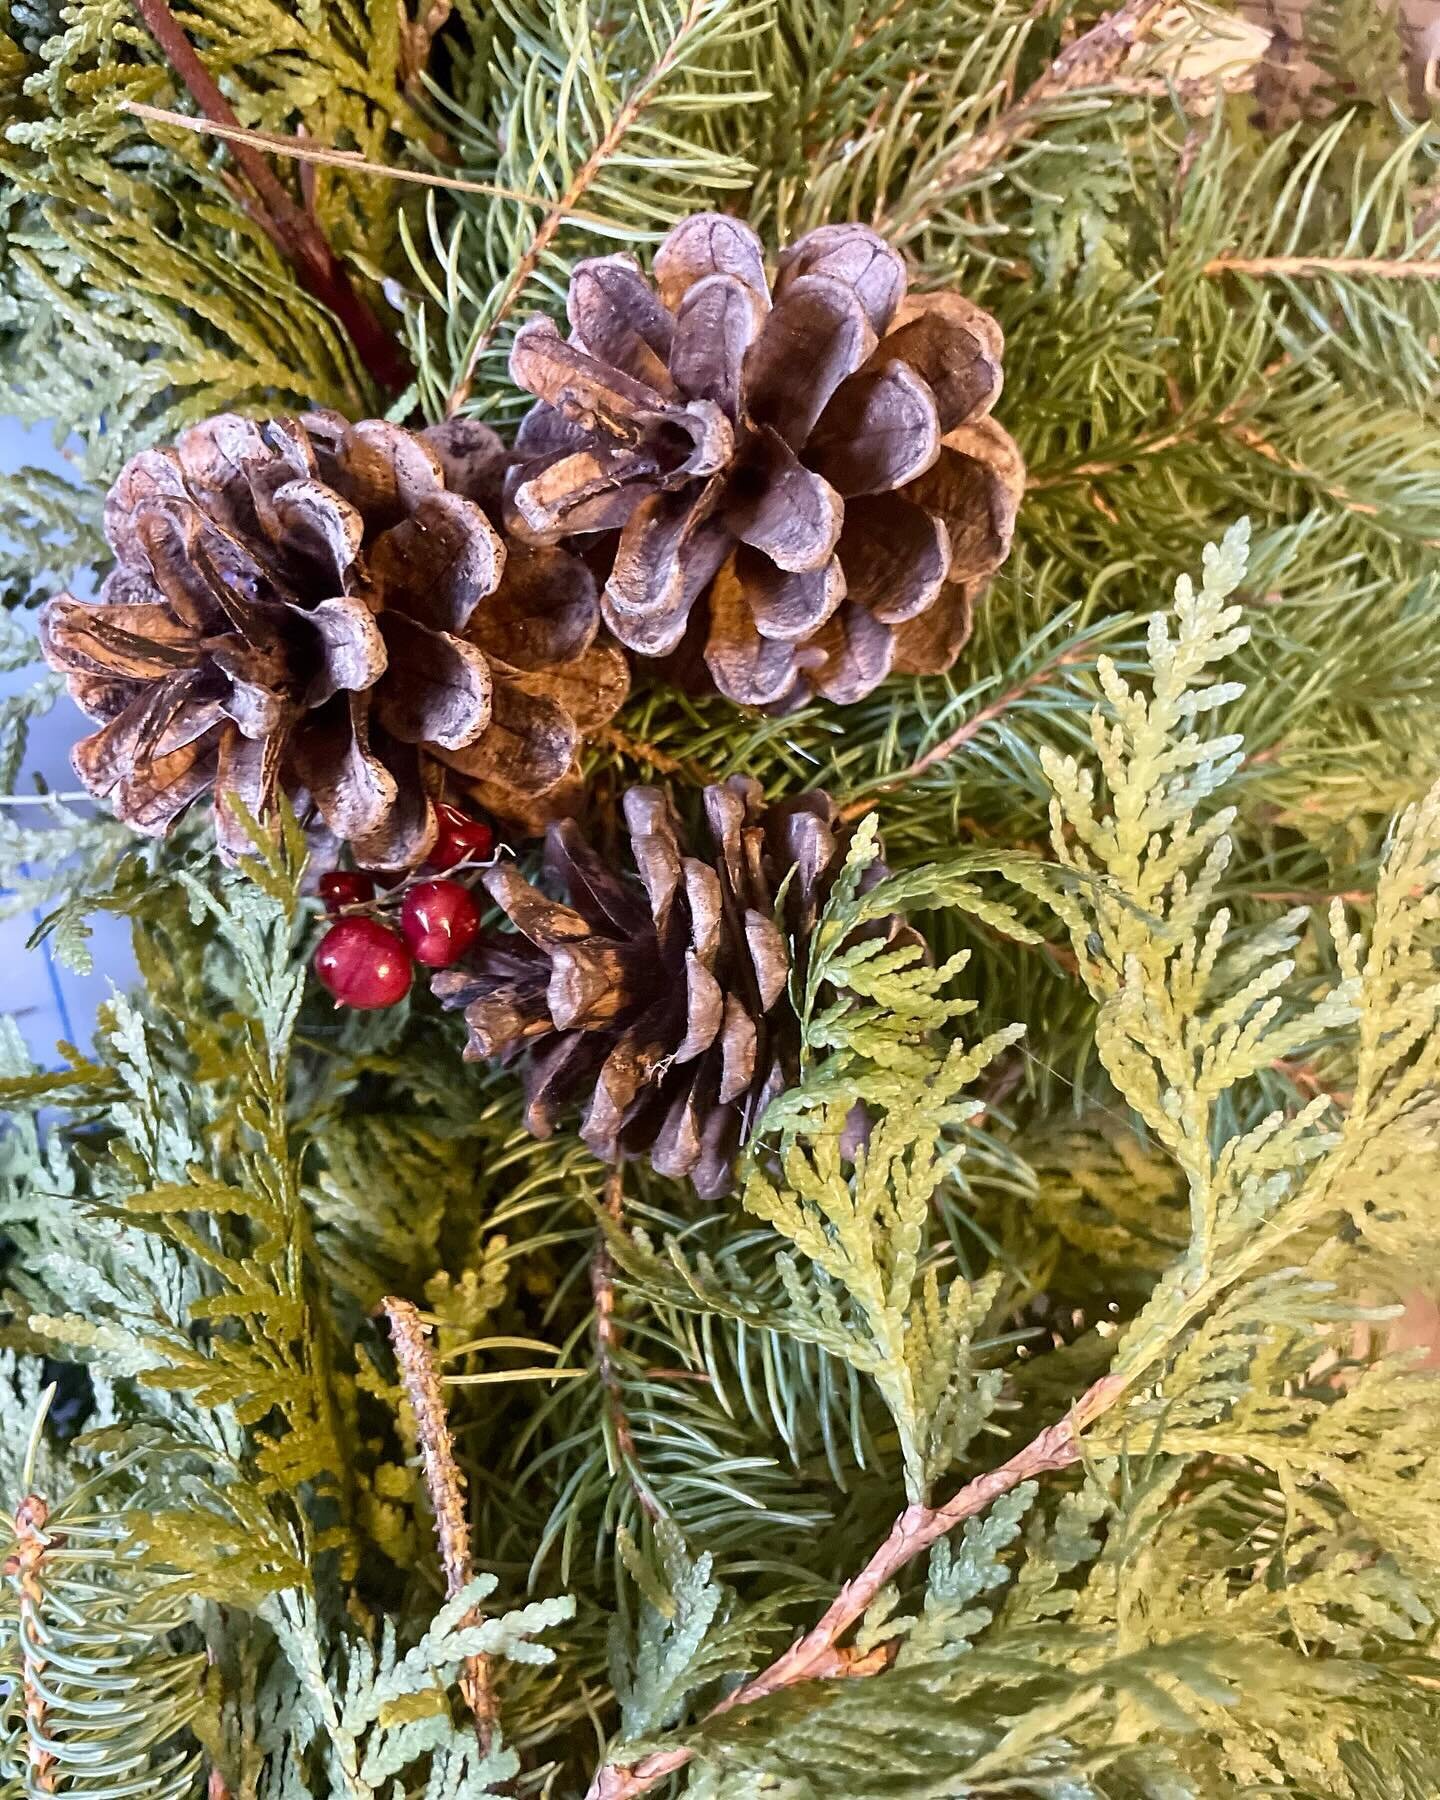 Hello, Manitoulin!

Today, join us at Nic&rsquo;s Market on 5050 Bidwell Road from 12-4 for some special treats you won&rsquo;t find anywhere else.

	&bull;	Limited Holiday Wreaths: We have a small number of beautifully handcrafted wreaths that will 